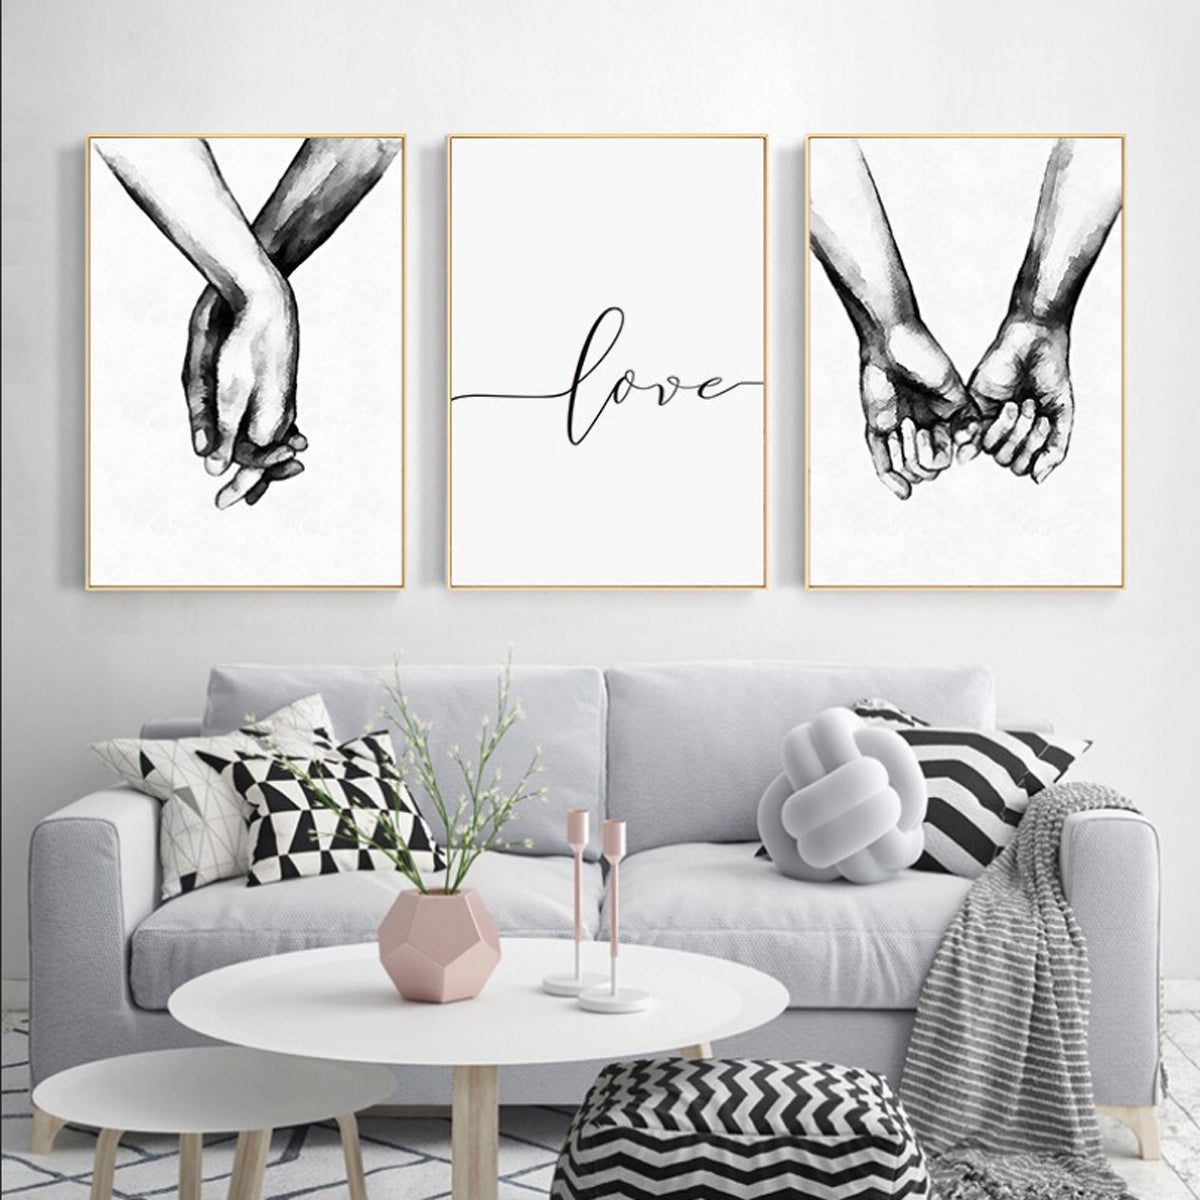 TPFLiving Poster Canvas / Loving Hands - Love - / several motifs in di –  Traumpreisfabrik